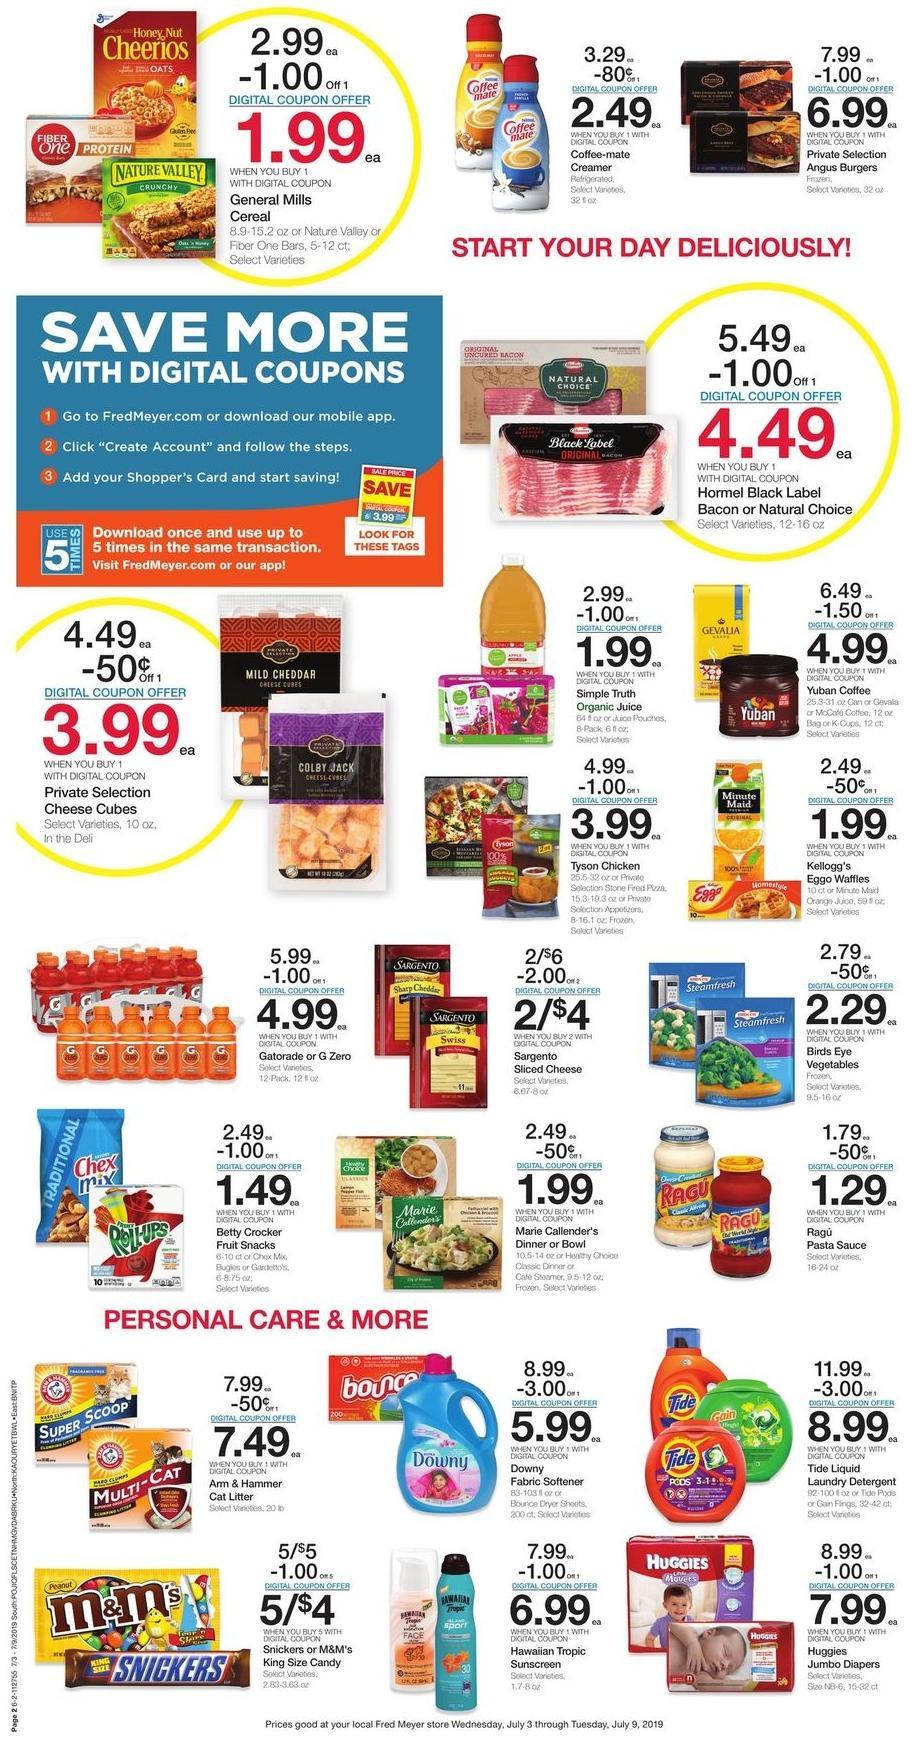 Fred Meyer Weekly Ad from July 3